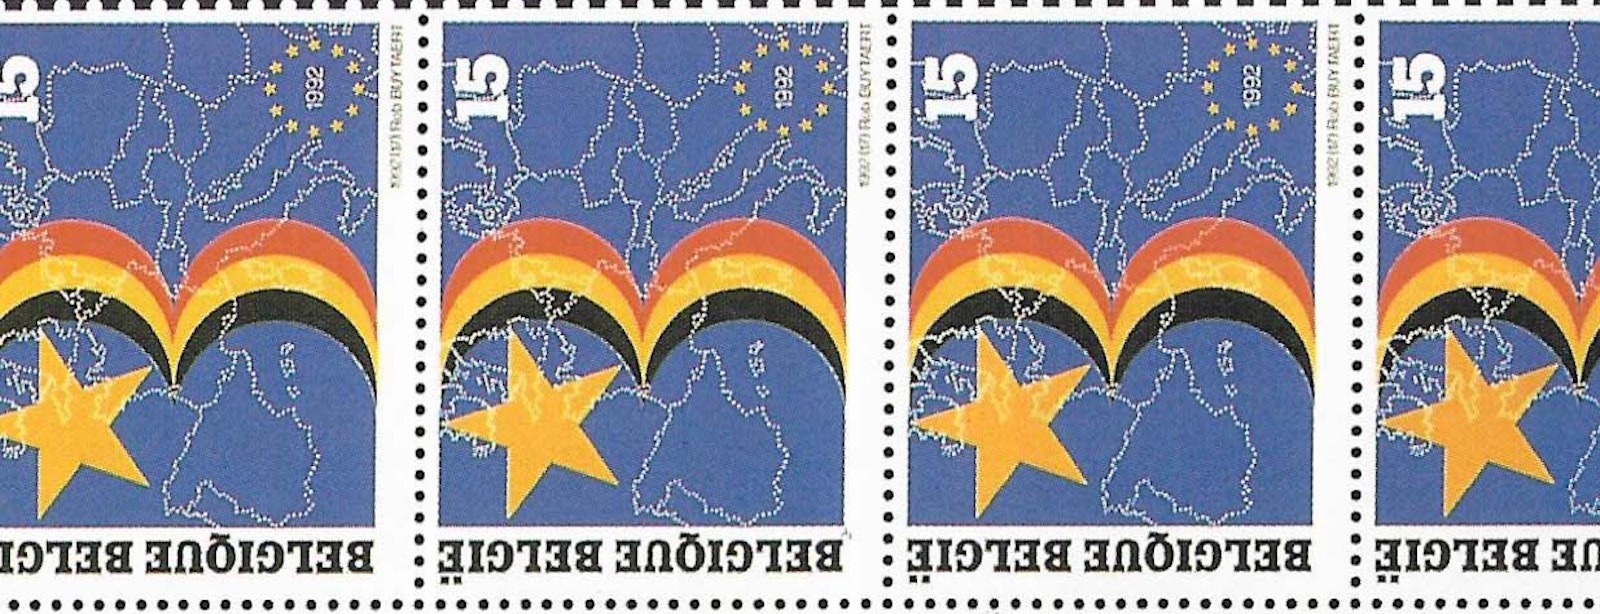 Postage stamp on the theme 'opening of the European market', Rob Buytaert(1992)